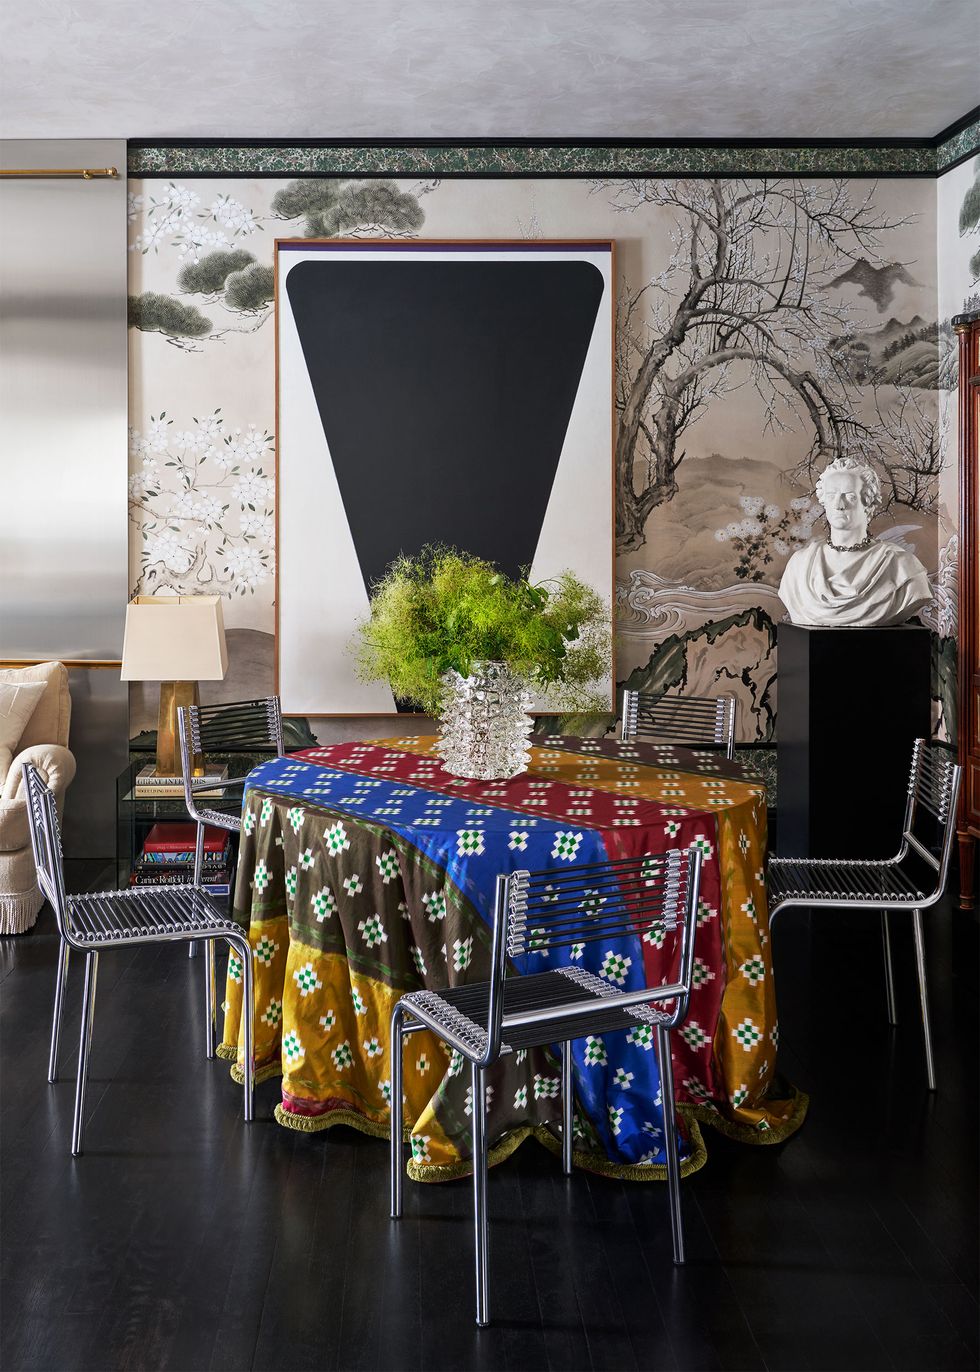 a round dining table covered with panels of brightly colored panels, four steel chairs, a glass vase with greens, a bust sculpture on a black plinth, a framed artwork of a black upside down triangle